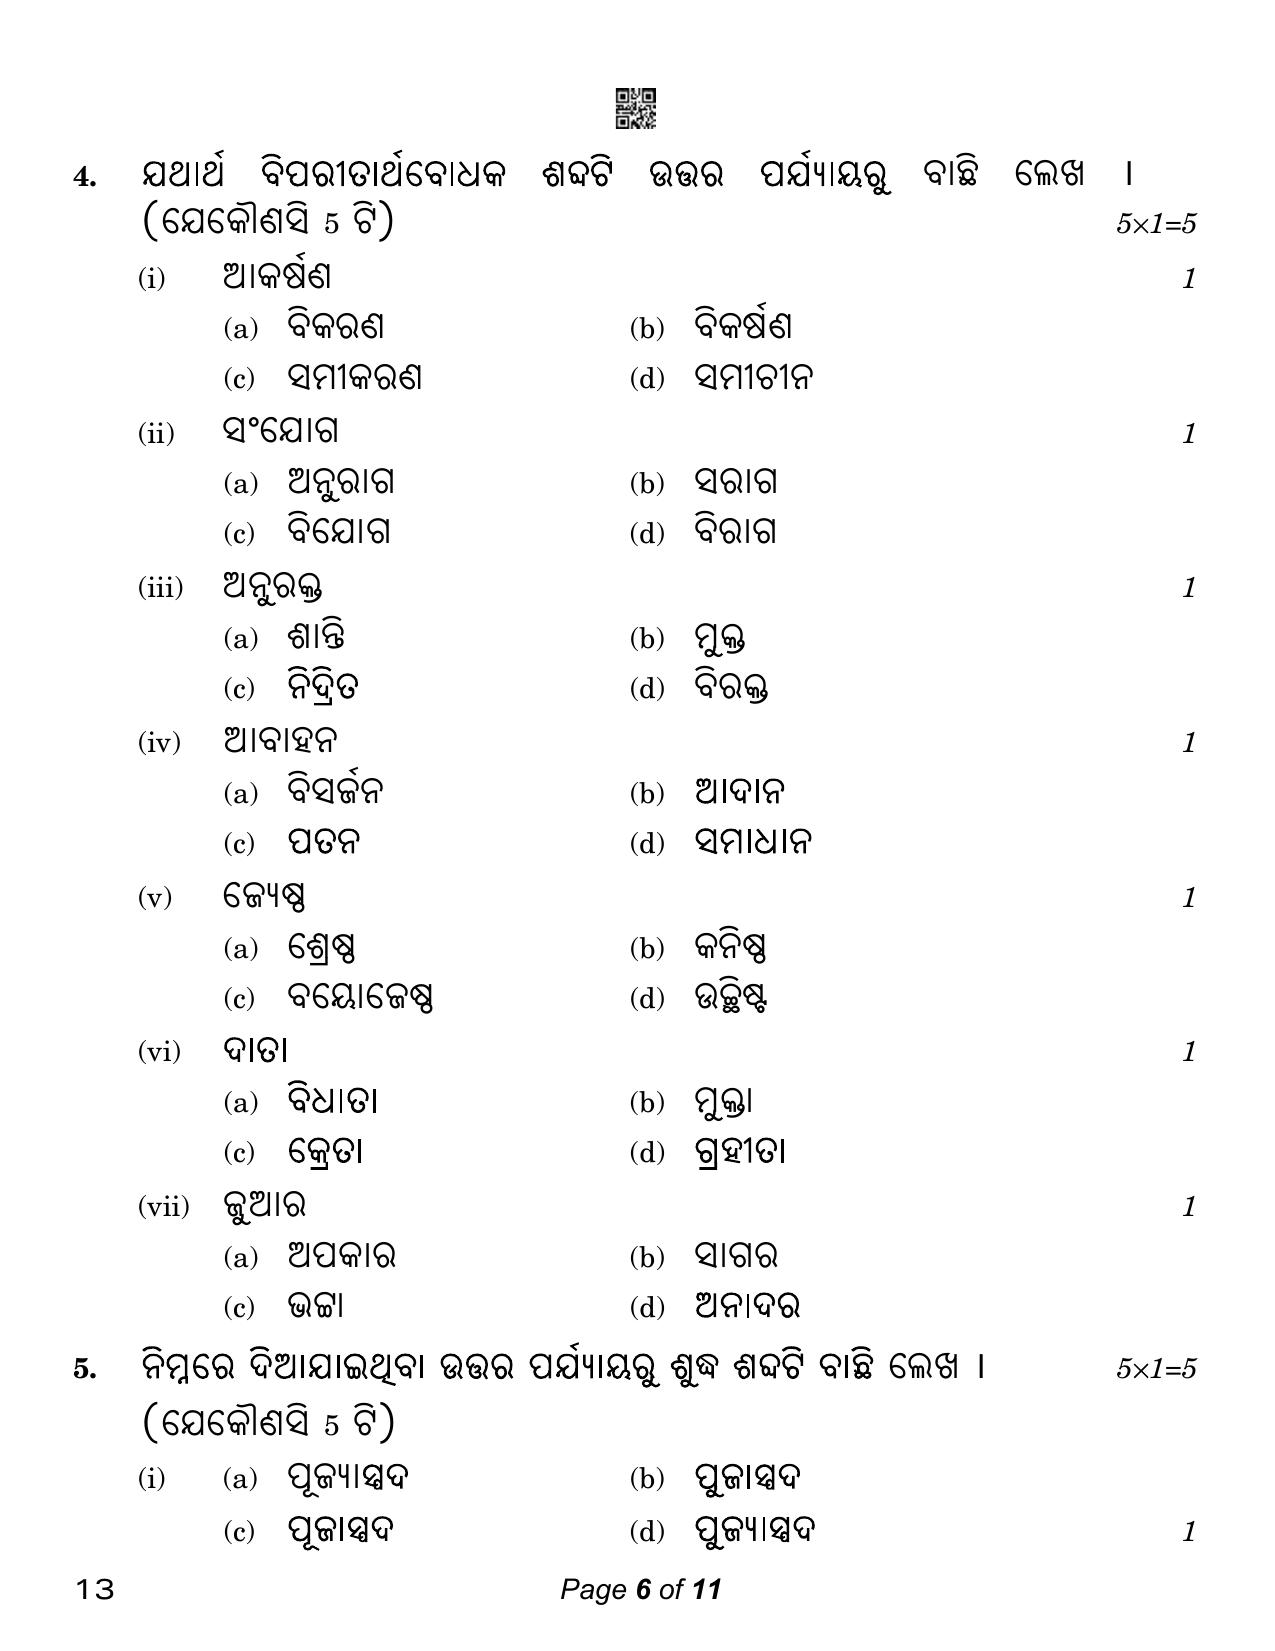 CBSE Class 12 Odia (Compartment) 2023 Question Paper - Page 6